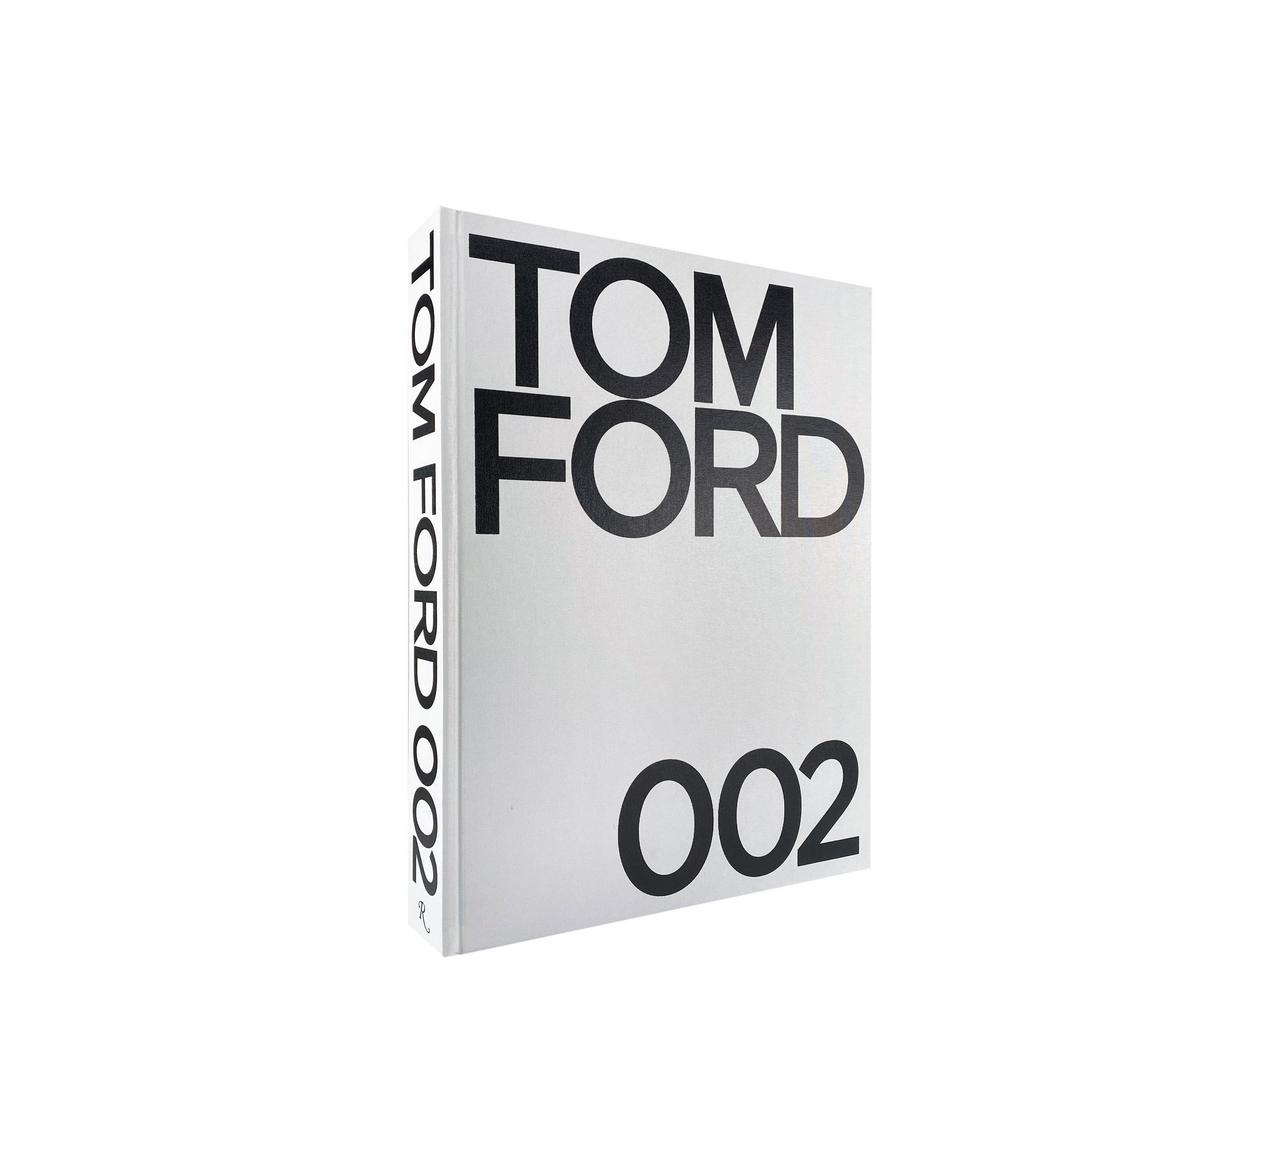 Tom Ford 002 [Book]